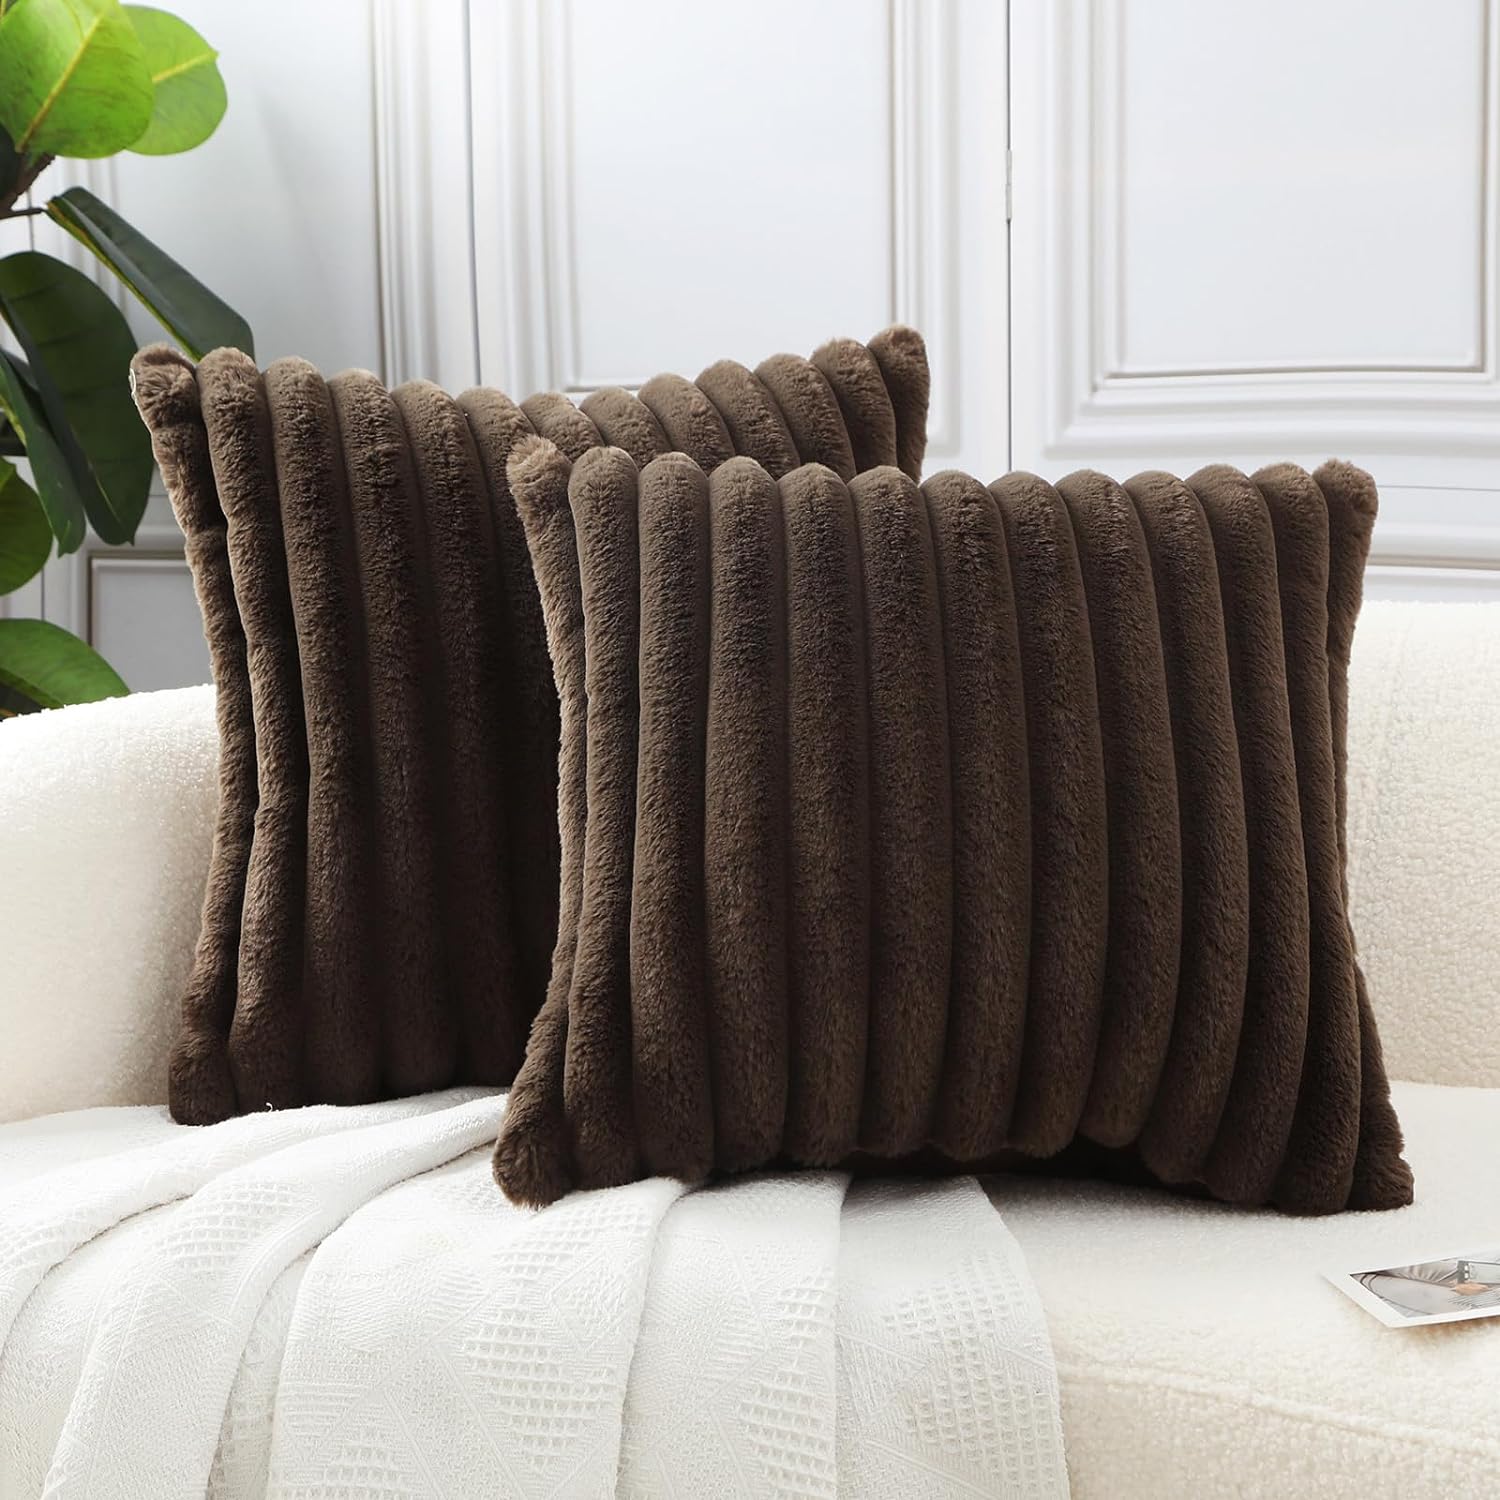 HPUK Faux Fur Plush Striped Throw Pillow Covers 18x18 Inch, Decorative Fluffy Couch Pillow Covers for Living Room, Accent Cozy and Fuzzy Pillow Covers for Couch, Sofa, and Bedroom(Deep Brown)